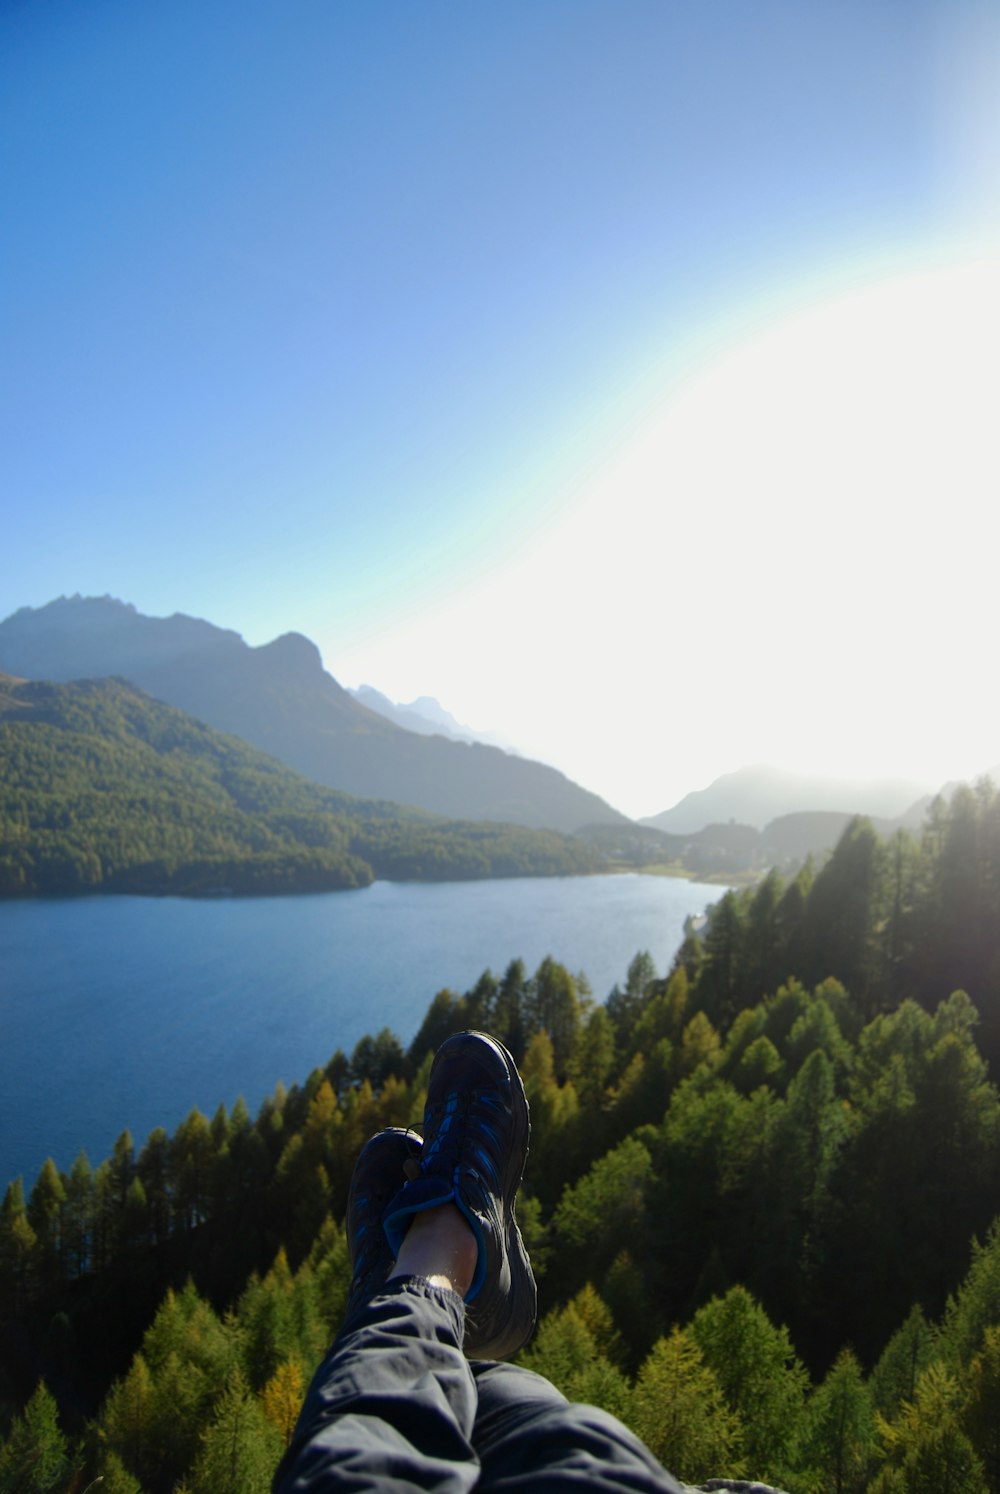 a person's feet with a view of a lake and mountains